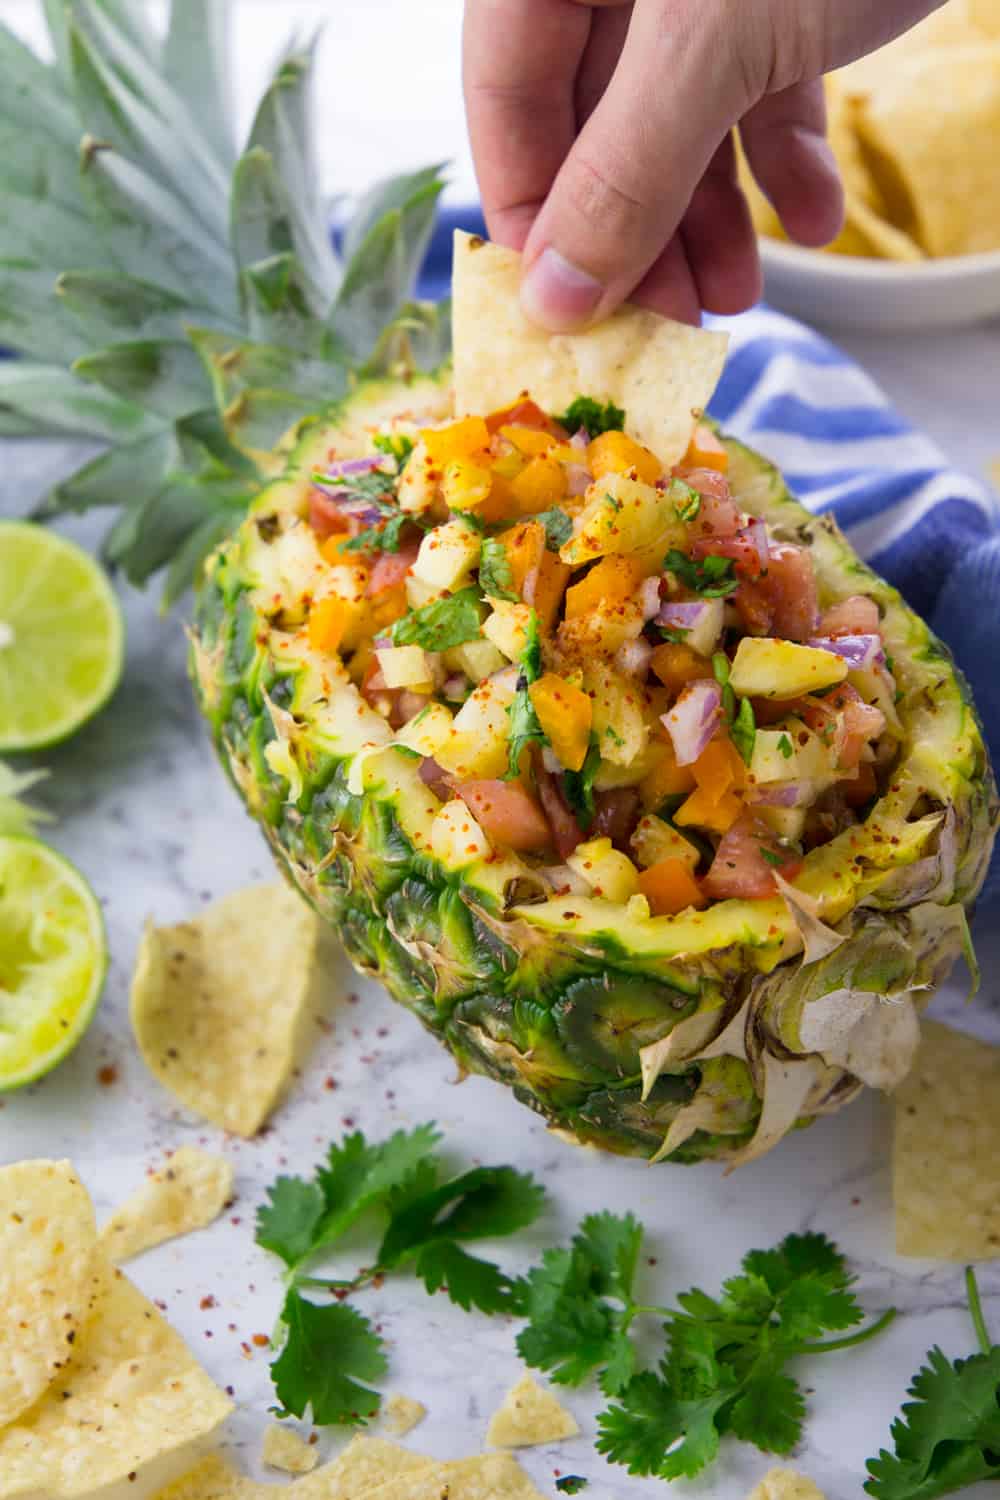 a hand dipping a tortilla chip into a halved pineapple filled with pineapple salsa